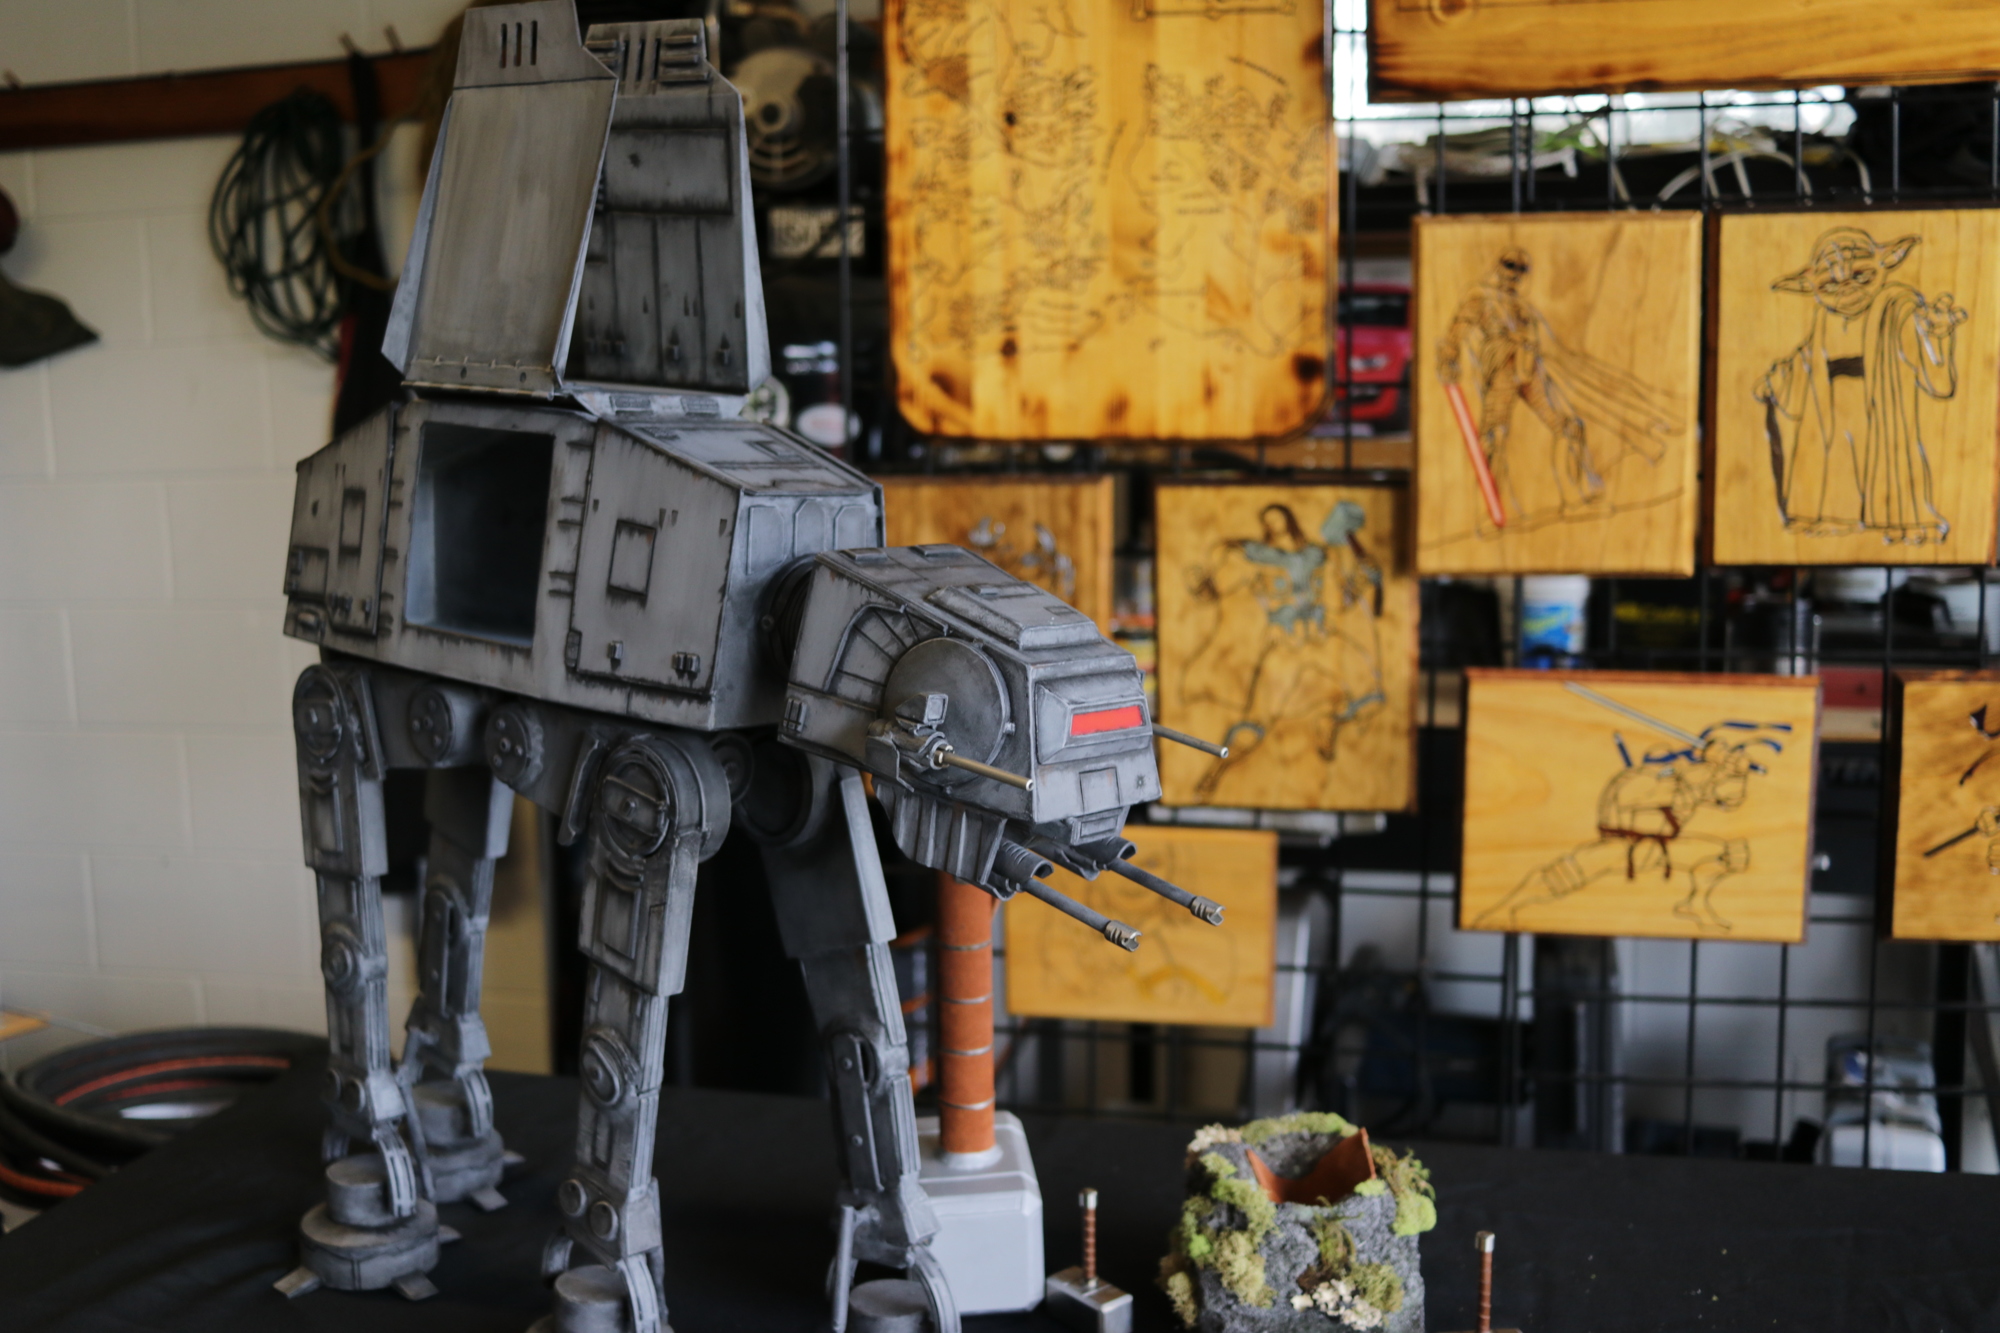  This AT-AT from “Star Wars” is just one of the 3-D metal models from Burn It Icons. This model is made from individual pieces of steel that Dean Bogart designed, cut and welded himself.